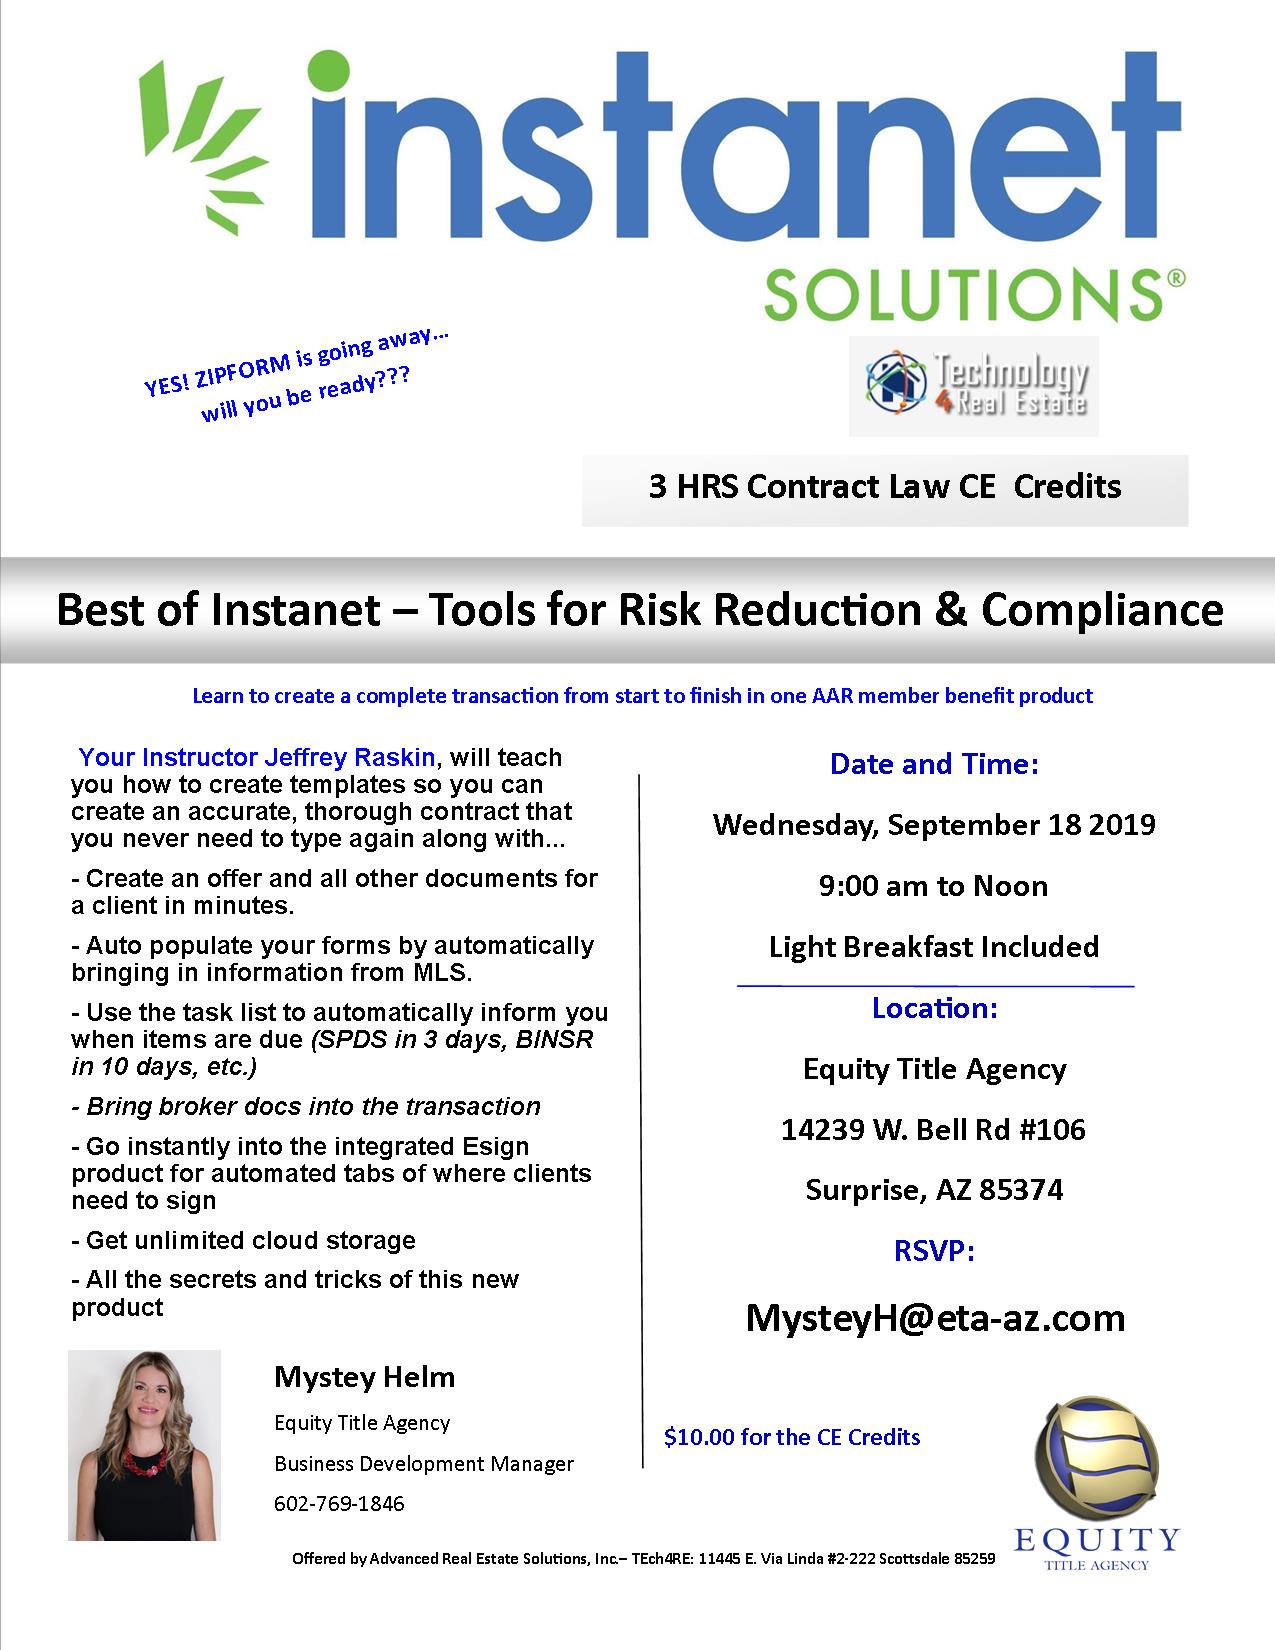 Sept 18 Mystey Instanet Solutions